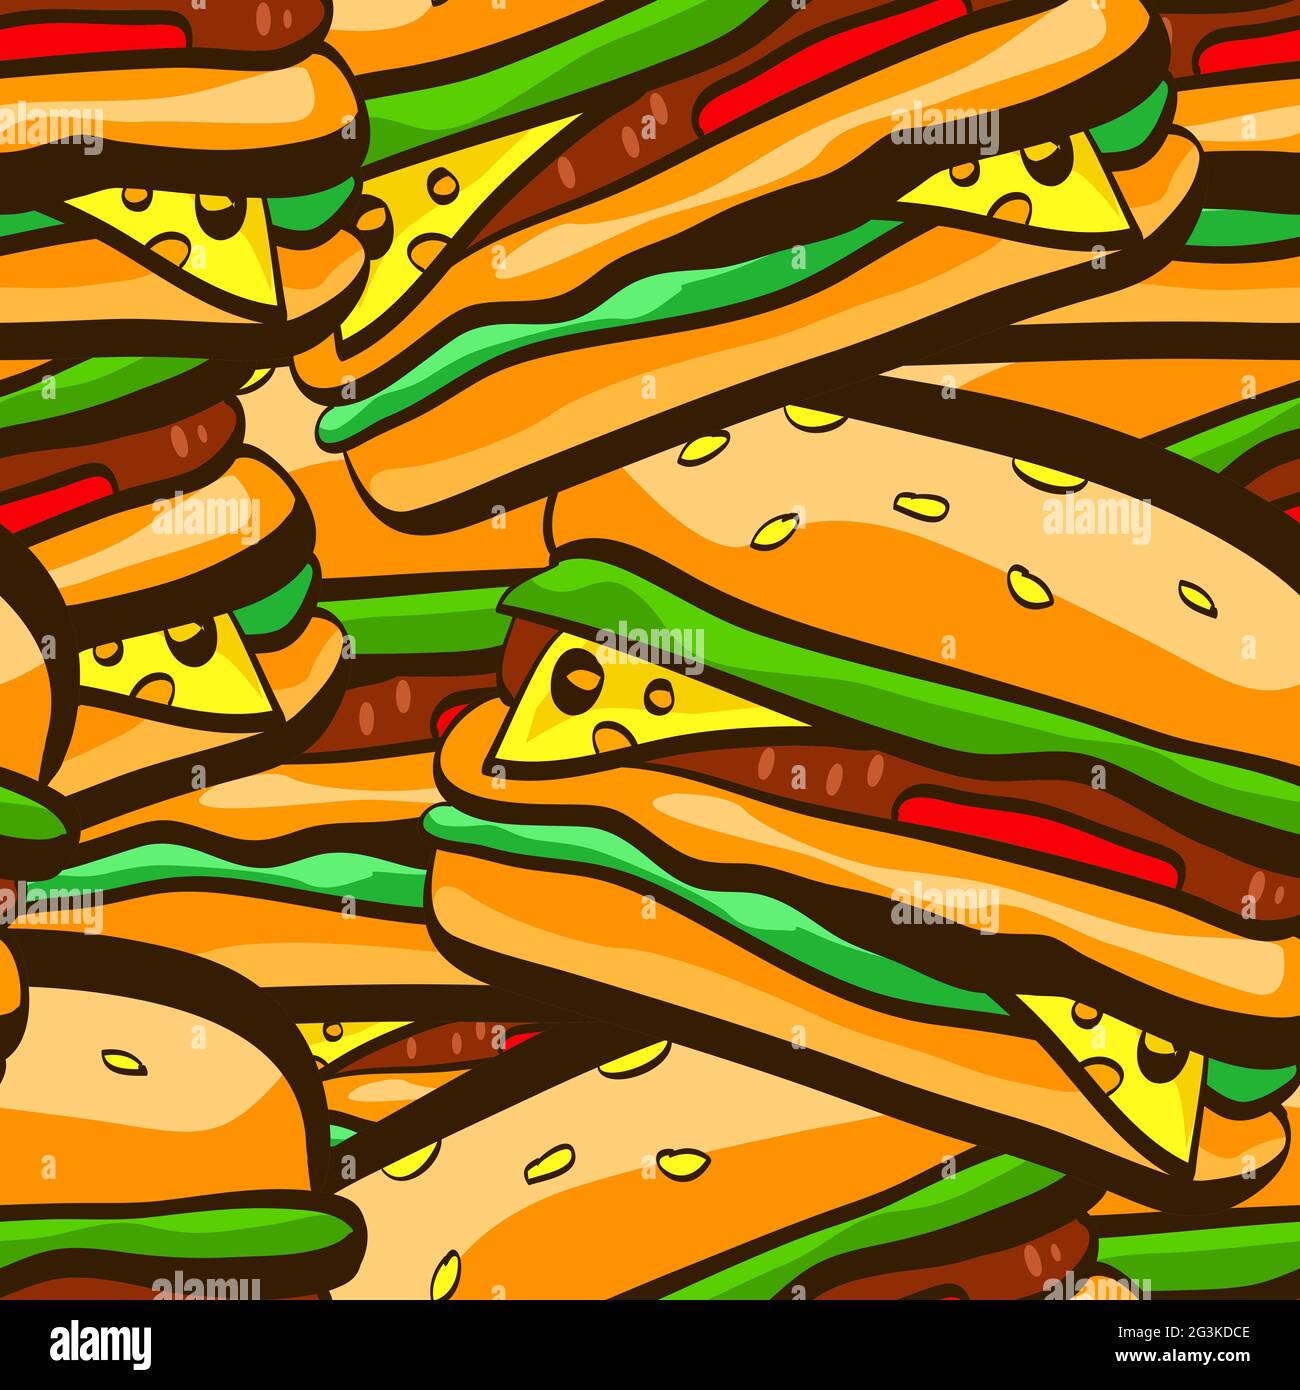 Illustration of seamless pattern with burgers Stock Photo